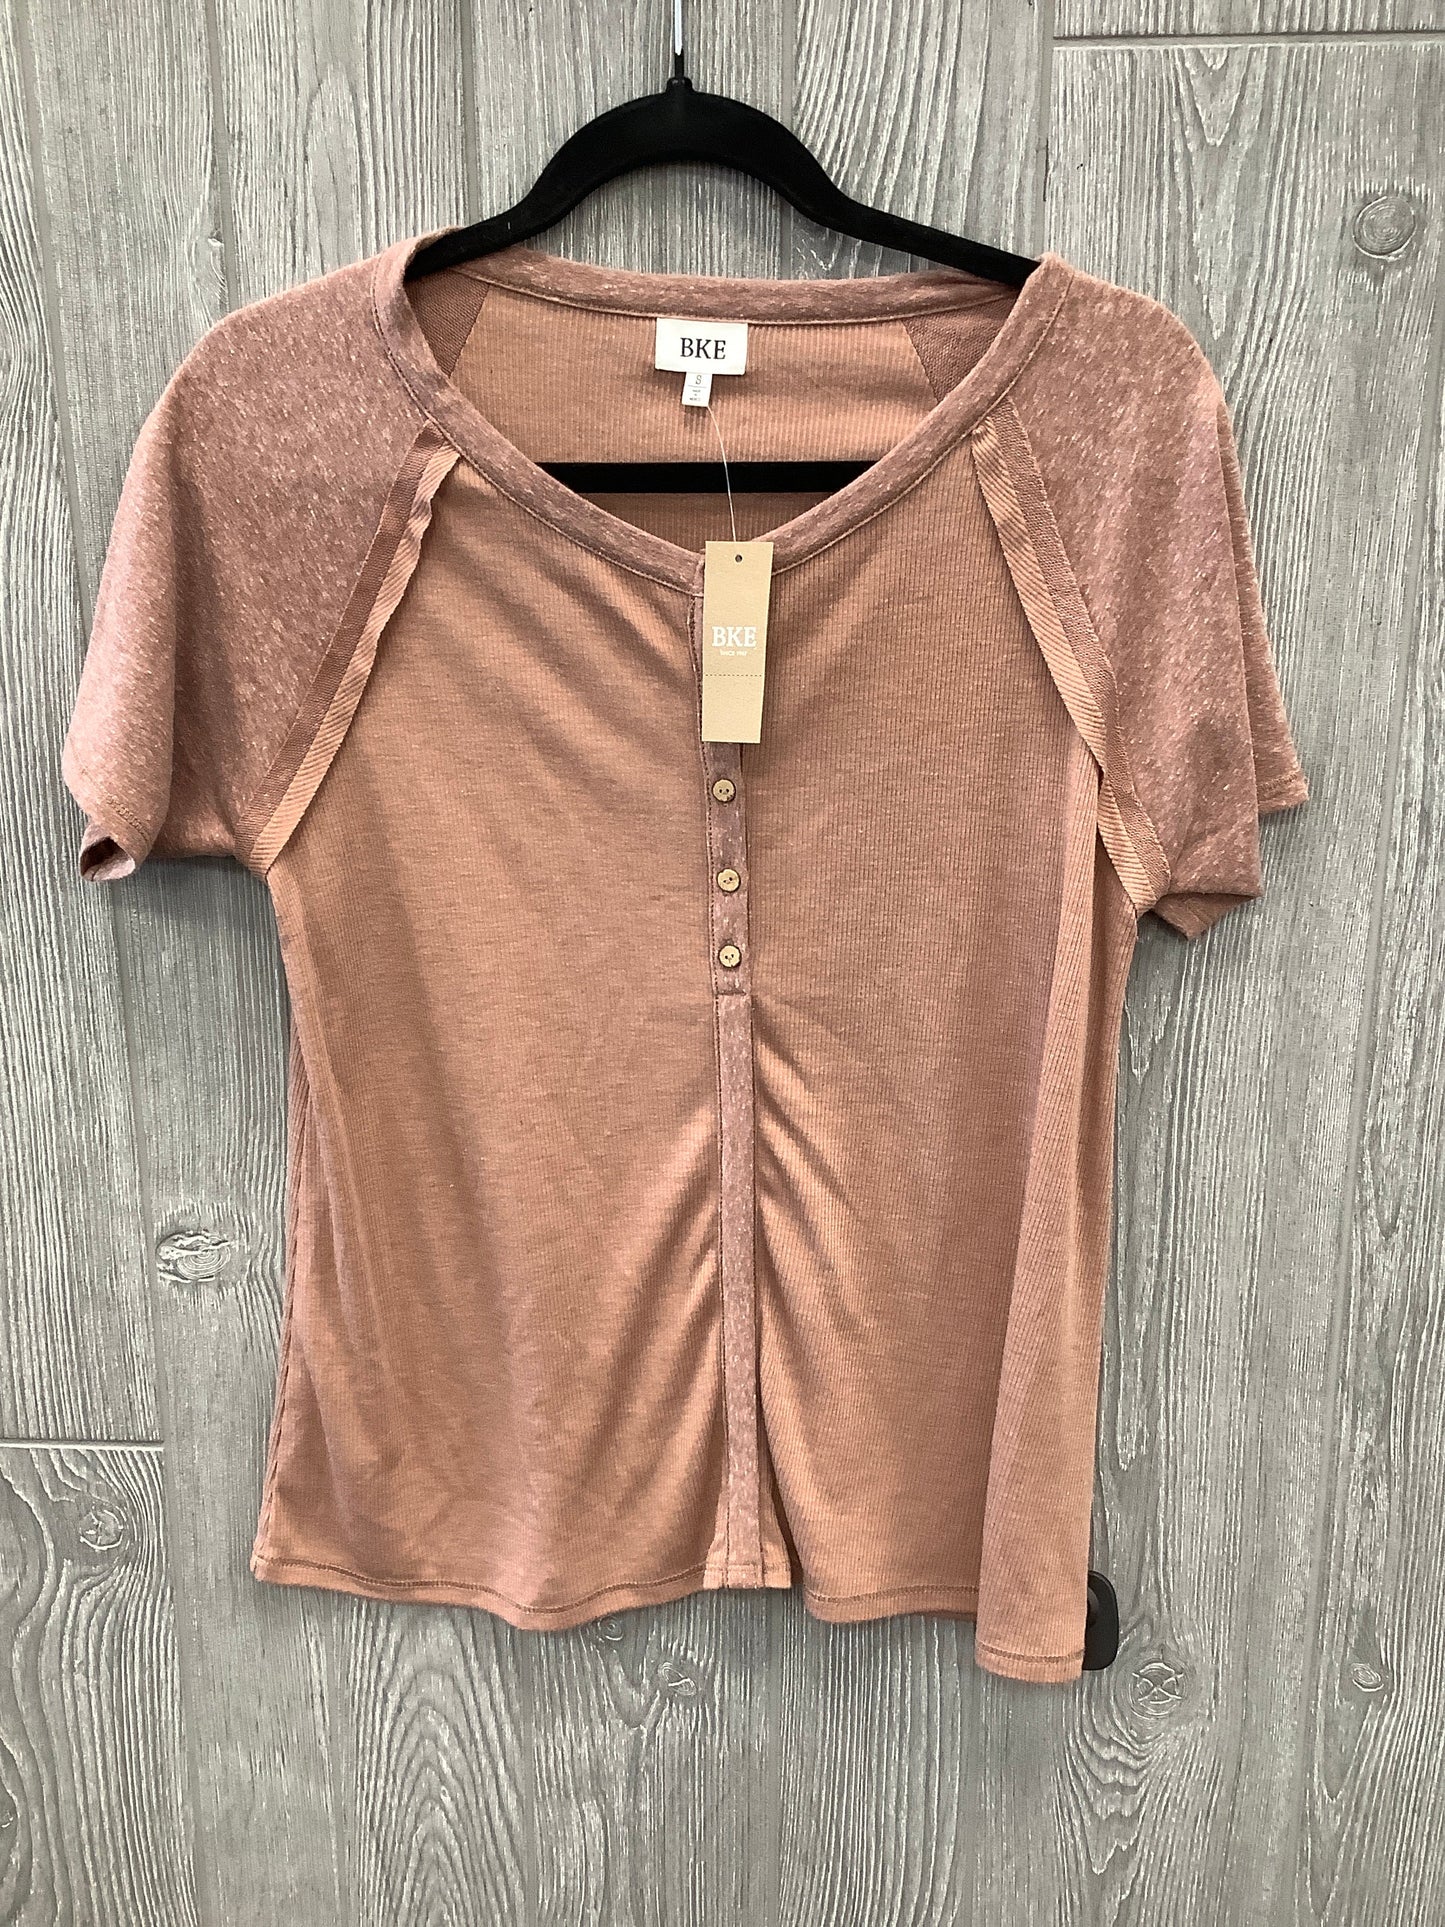 Brown Top Short Sleeve Bke, Size S